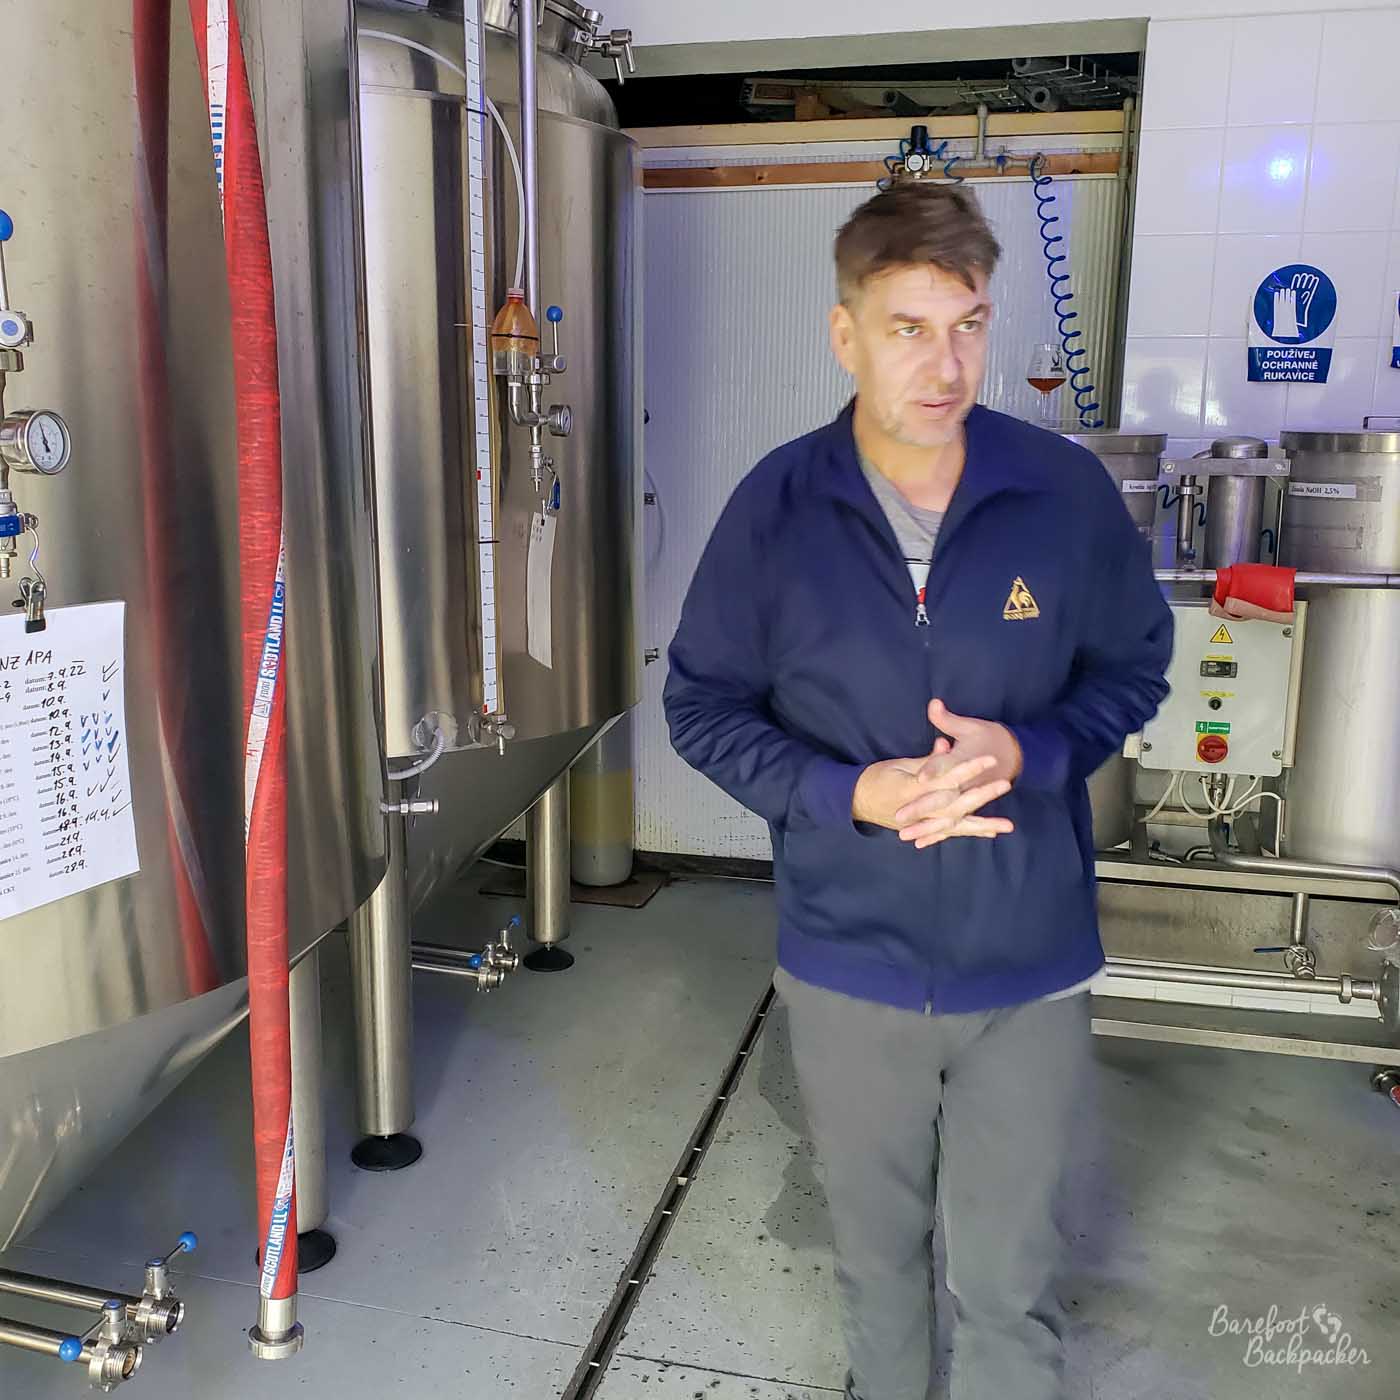 A man, Filip, stands to the side of a series of large metallic beer vats and in front of some industrial equipment.